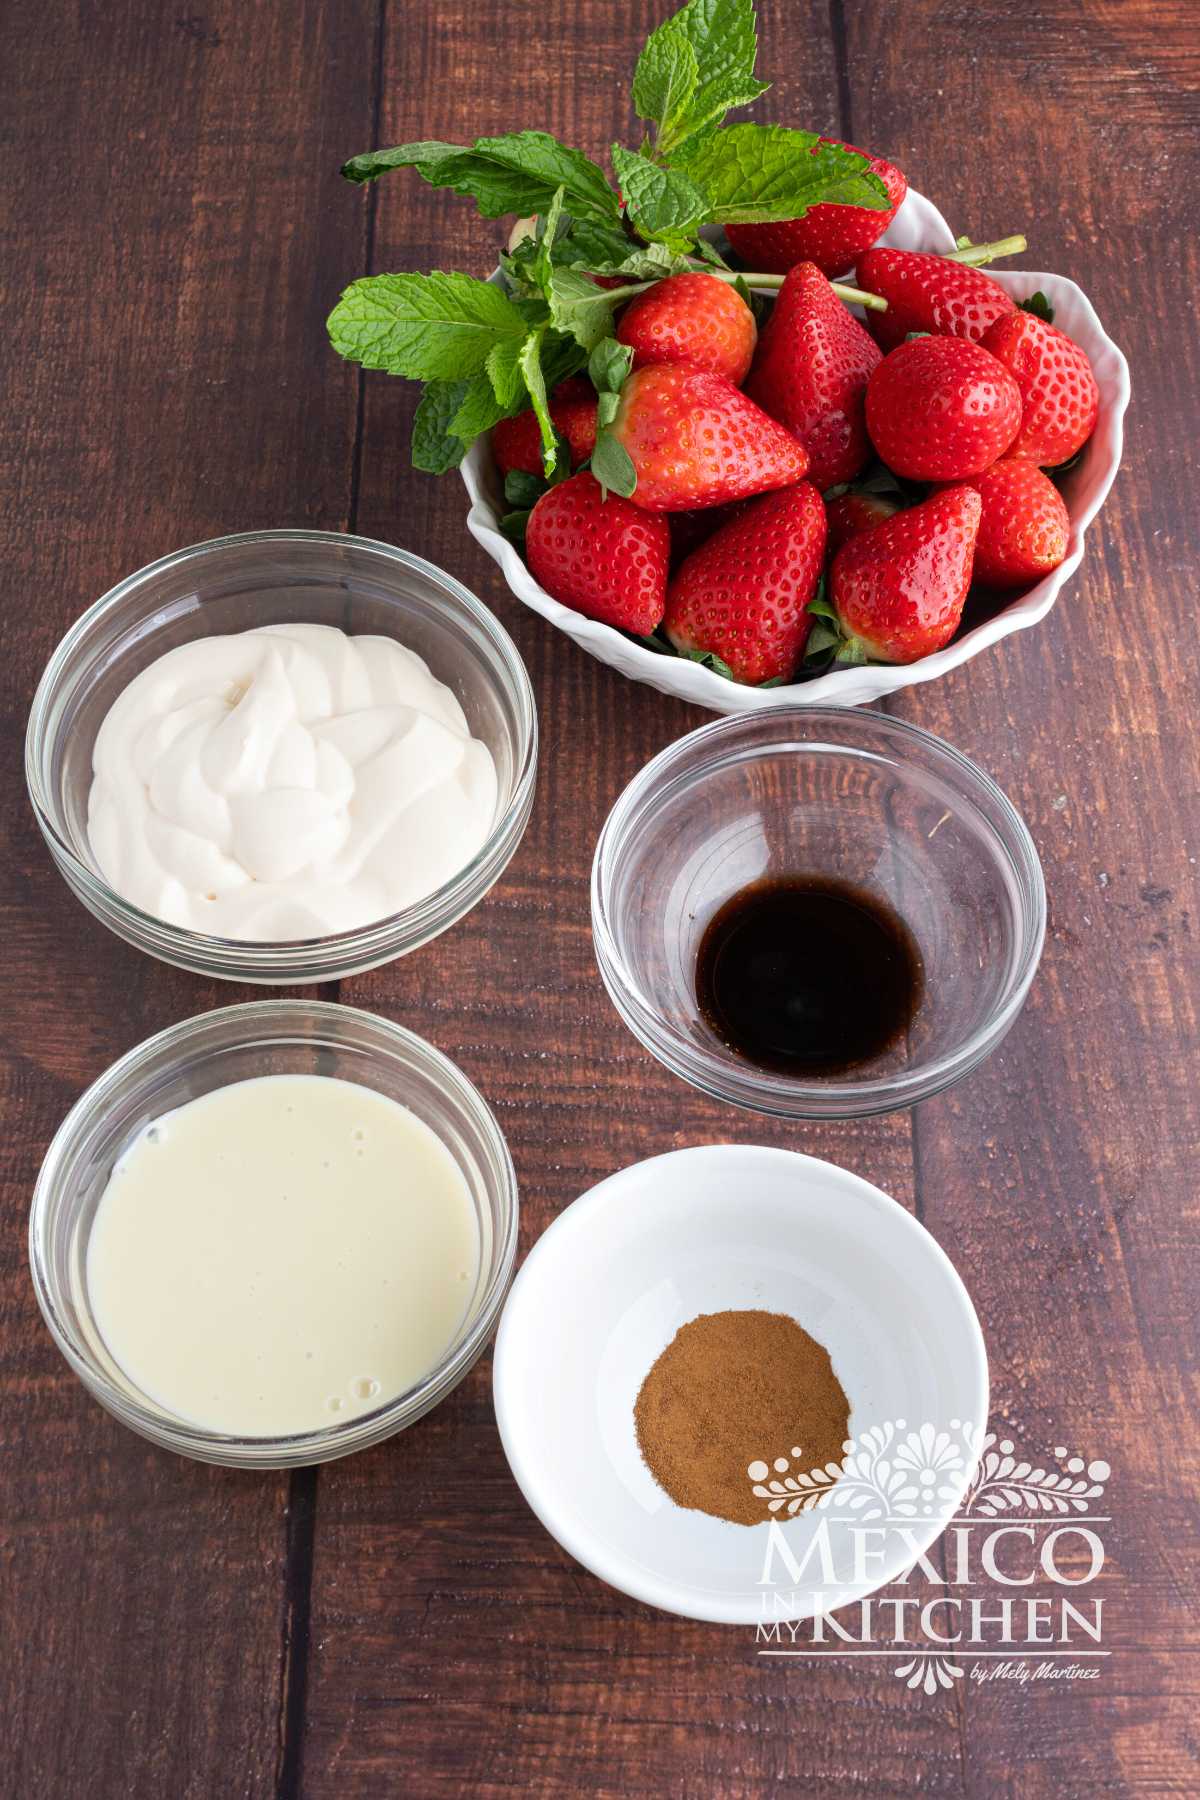 Ingredients like Mexican crema, condensed milk, vanilla, powder cinnamon, and strawberries are displayed on a table.